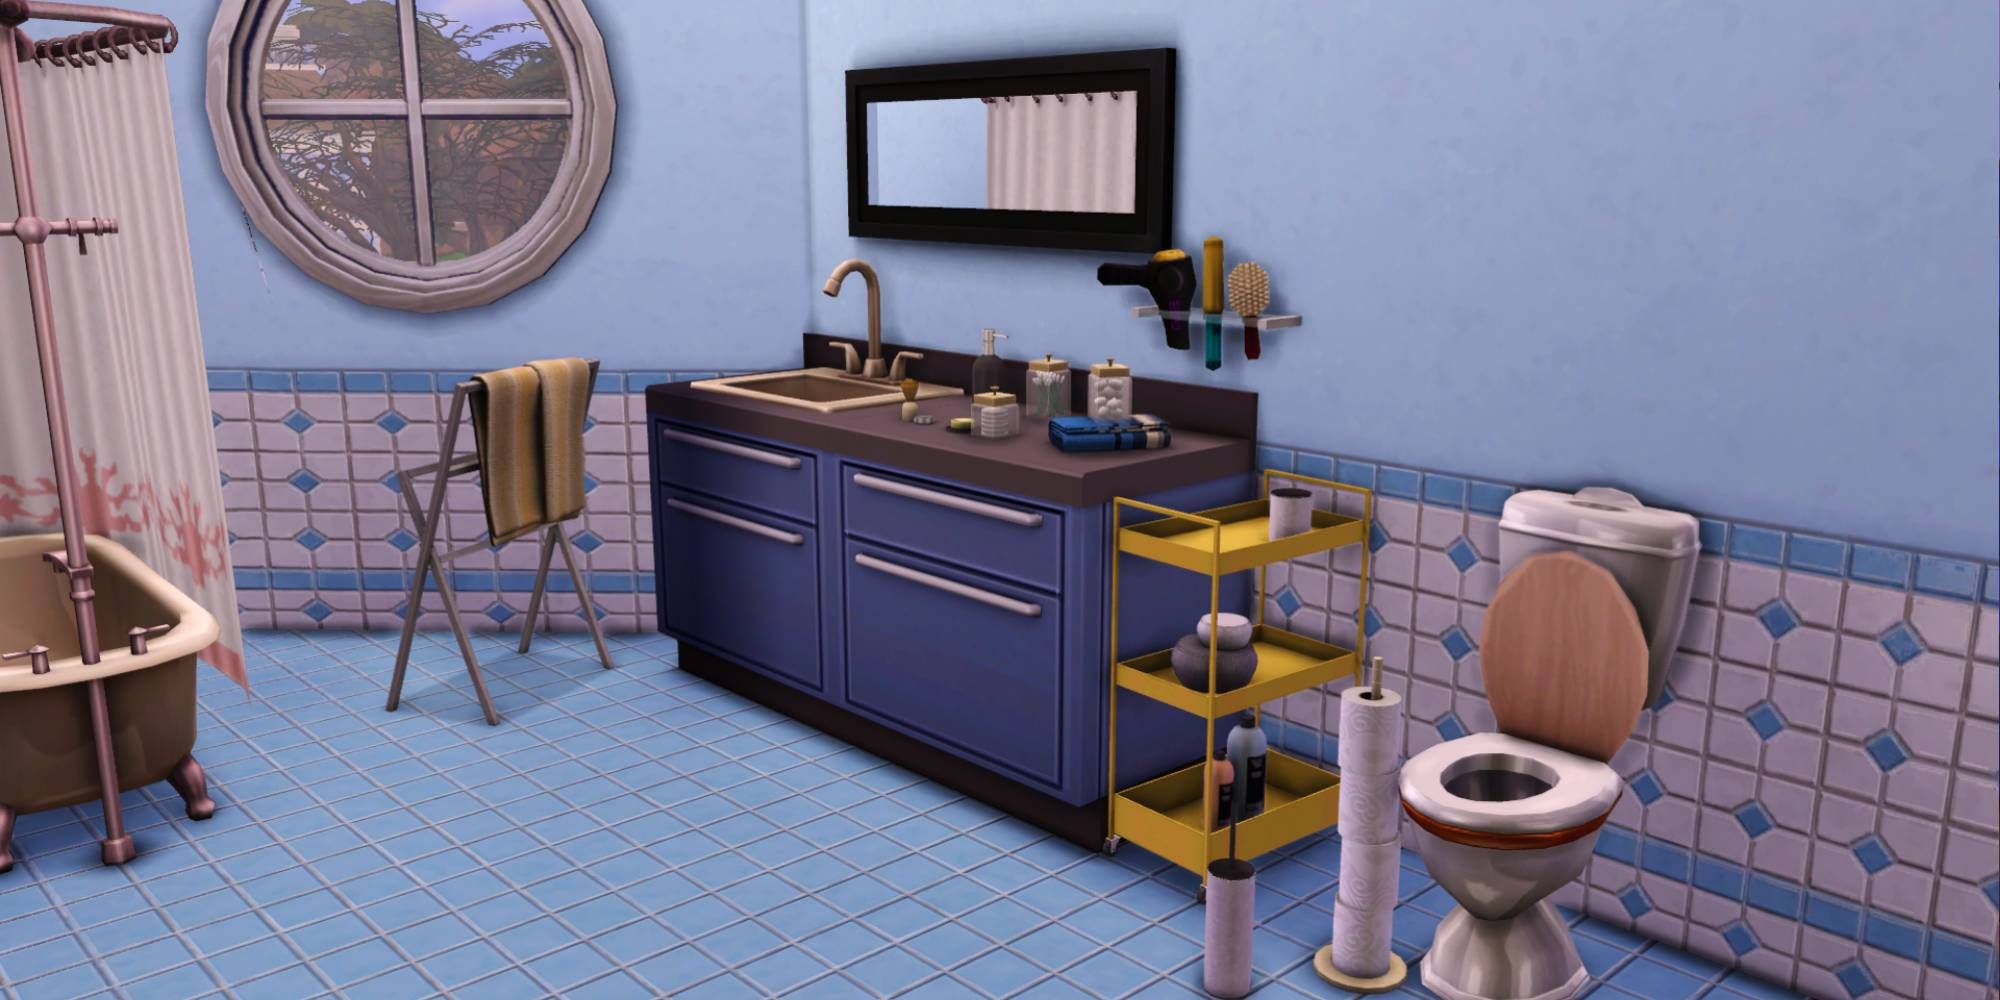 A blue and yellow bathroom showing the clutter CC, including a trolley, toilet paper holder, and various counter items